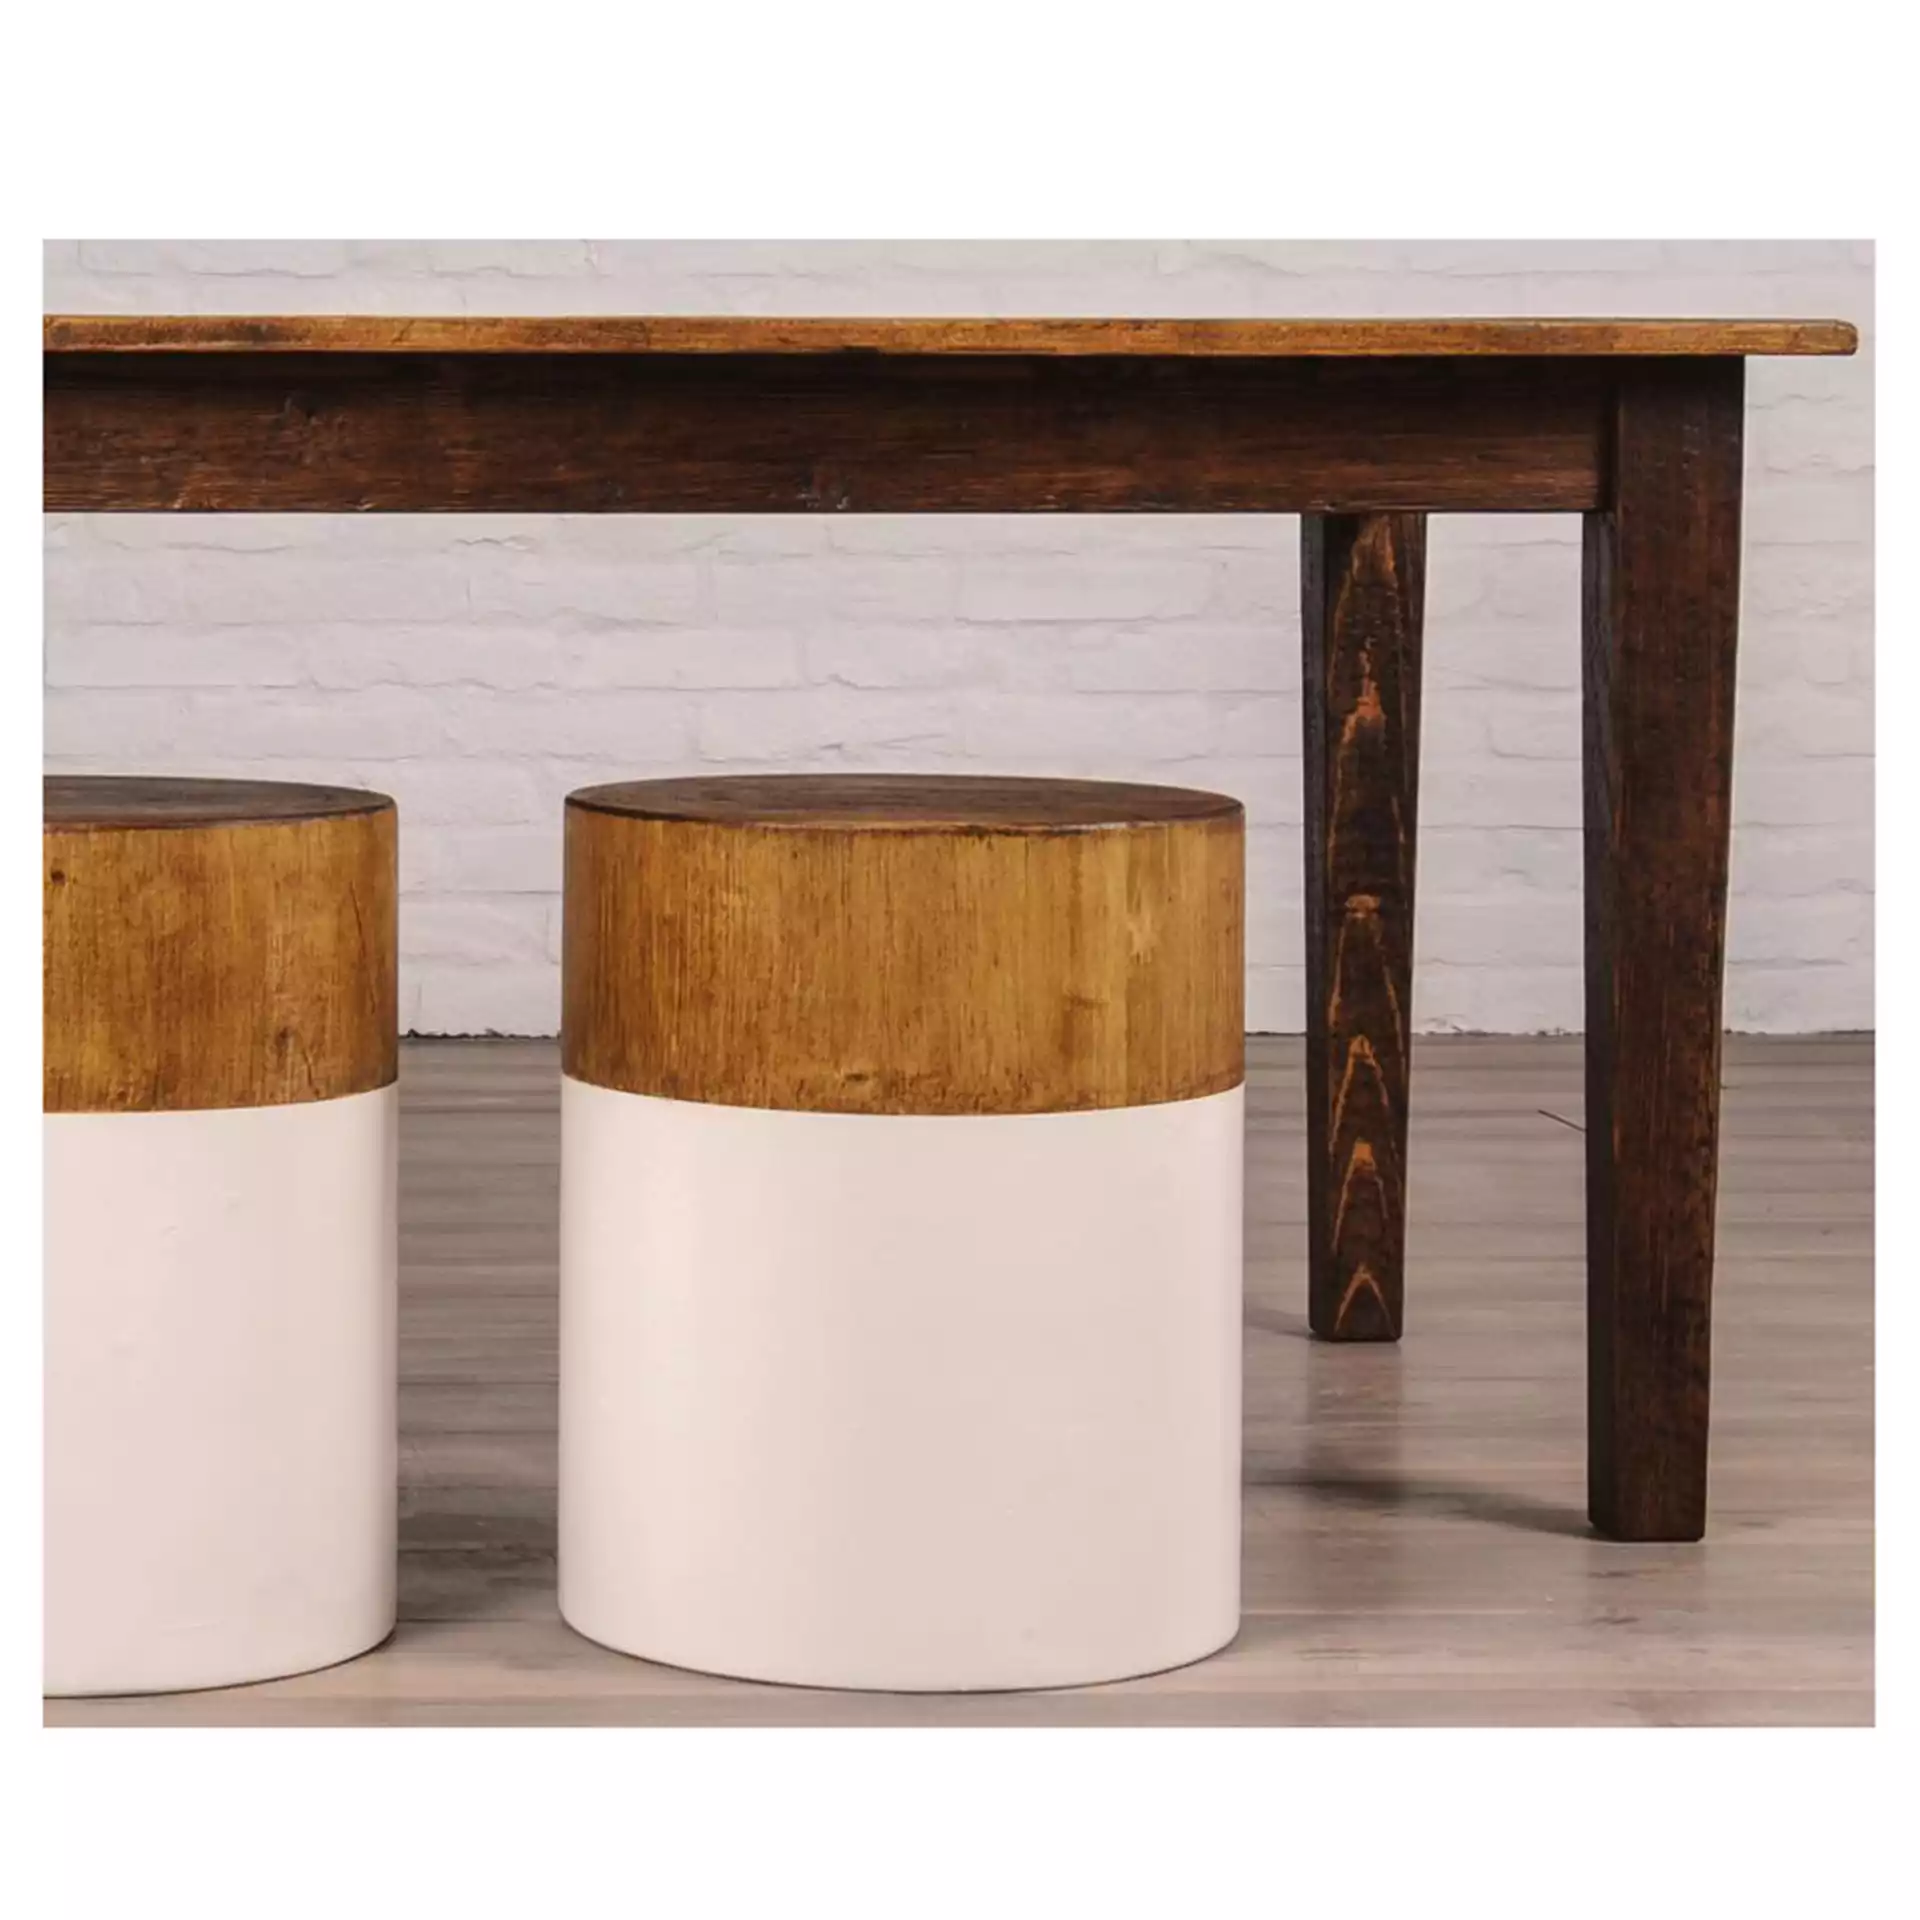 Harley Rustic Lodge White Reclaimed Wood Round Stool